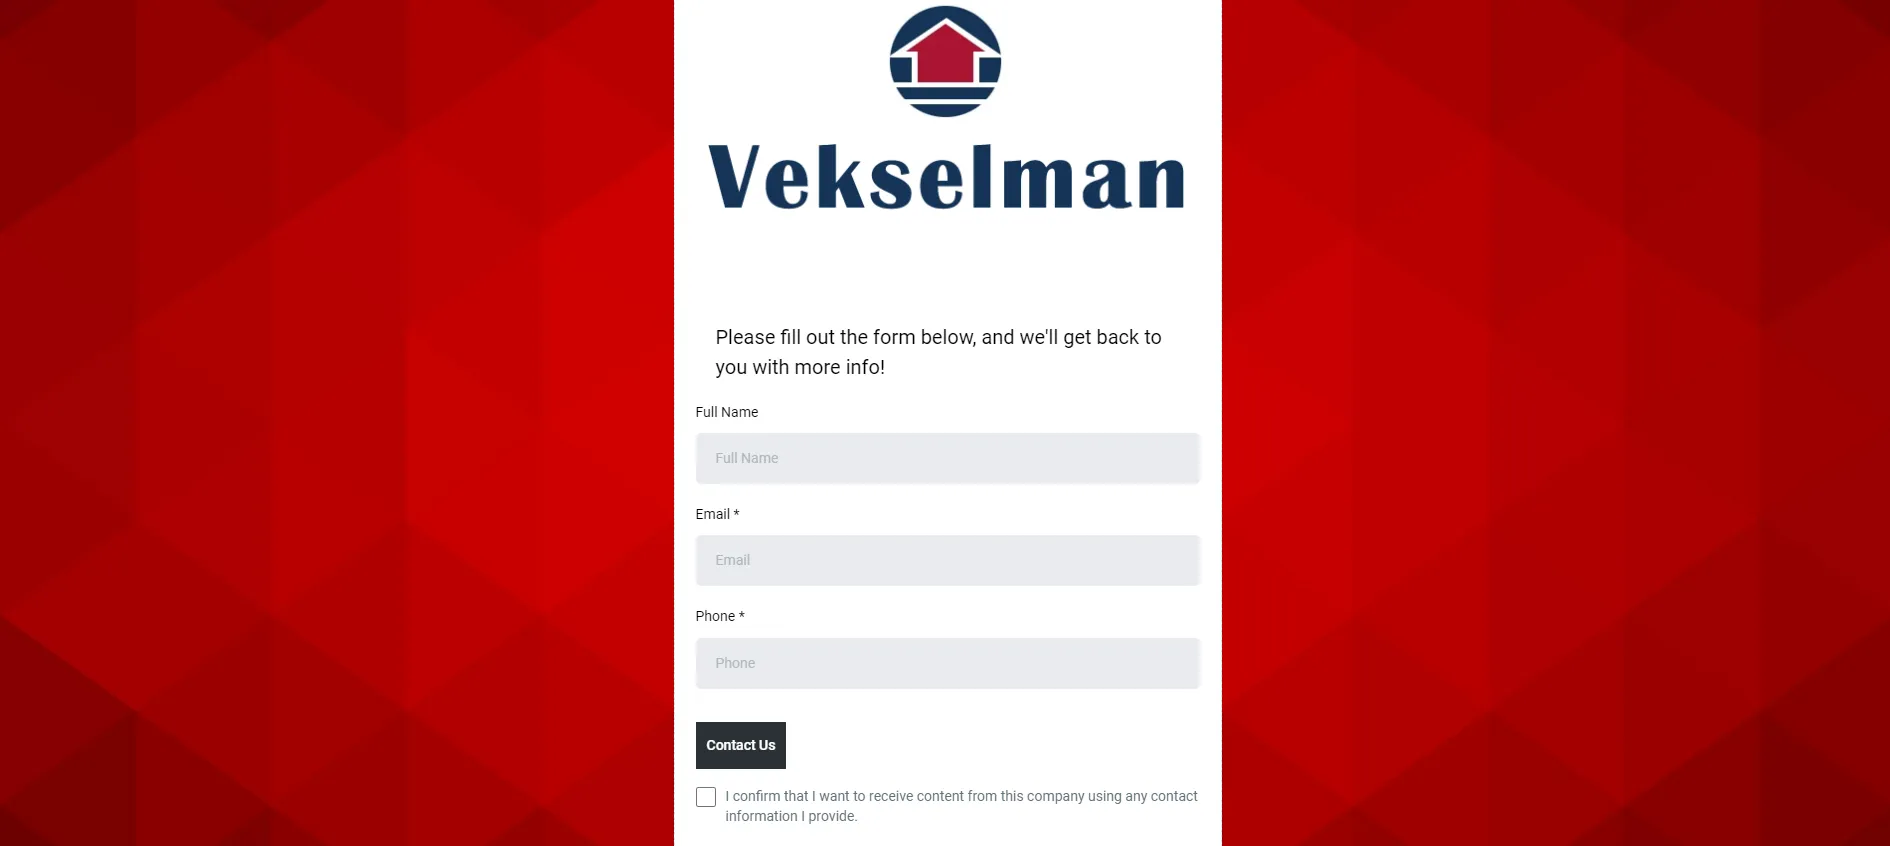 Learn The Real Estate Market With Peter Vekselman